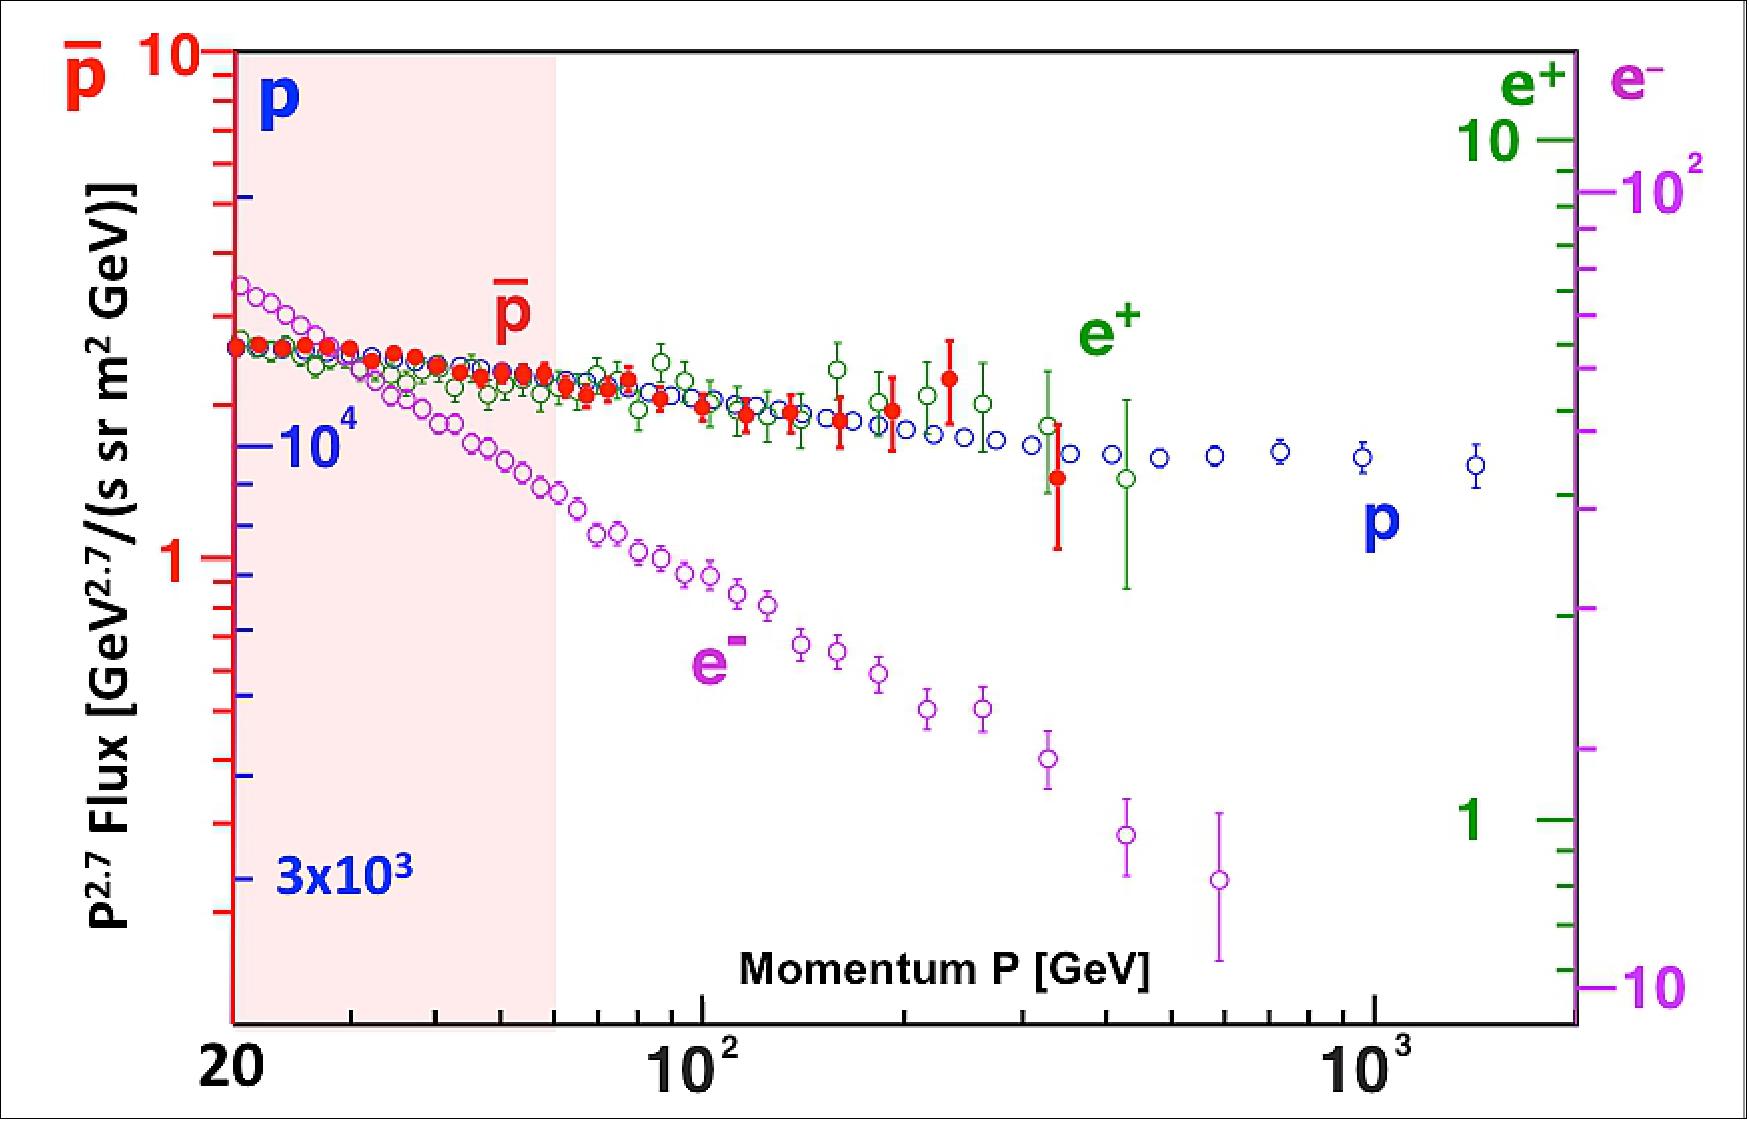 Figure 13: The positron, proton, and antiproton spectra have identical momentum dependence from 60 to 500 GeV. The electron spectrum exhibits a totally different behavior, it decreases much more rapidly with increasing momentum (image credit: AMS Collaboration)